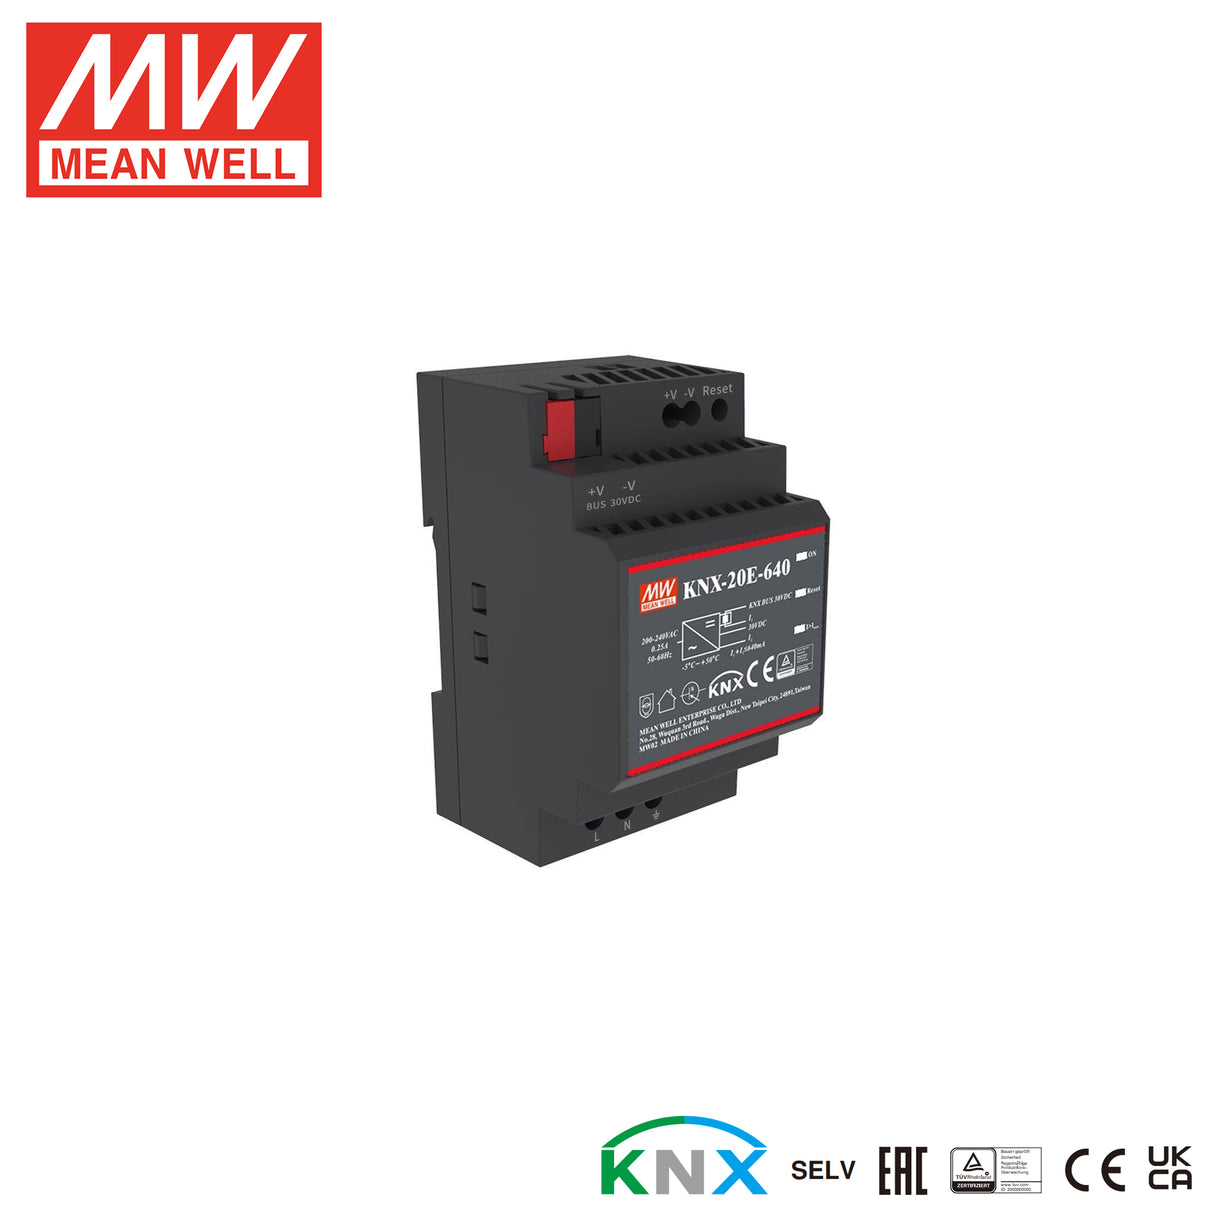 Mean Well KNX-20E-640 KNX Power Supply 640mA